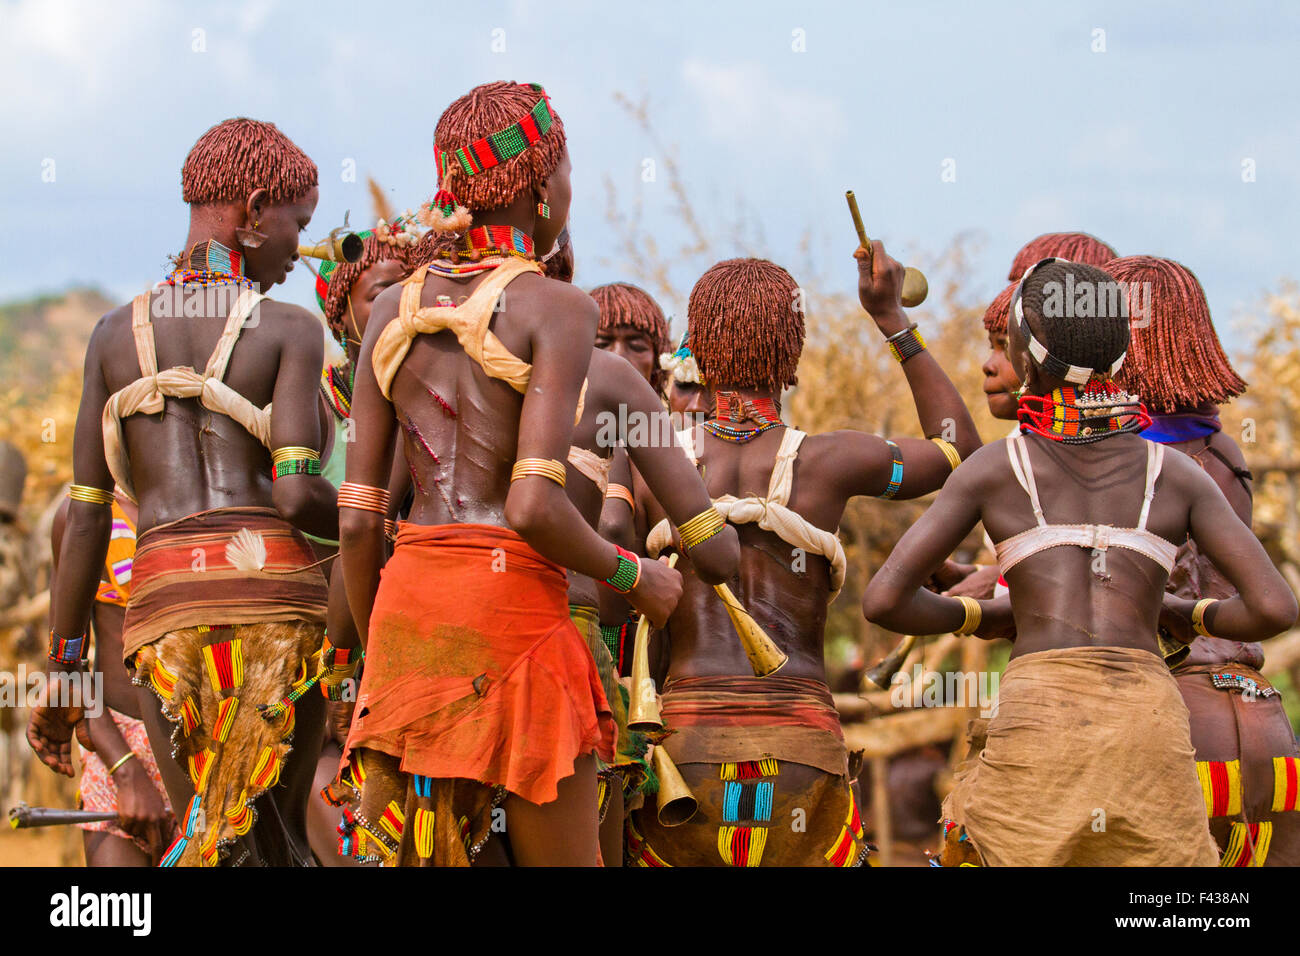 The raw scars on a Hamar woman's back after being whipped at a 'Jumping of the Bull' ceremony. Omo Valley Ethiopia Stock Photo